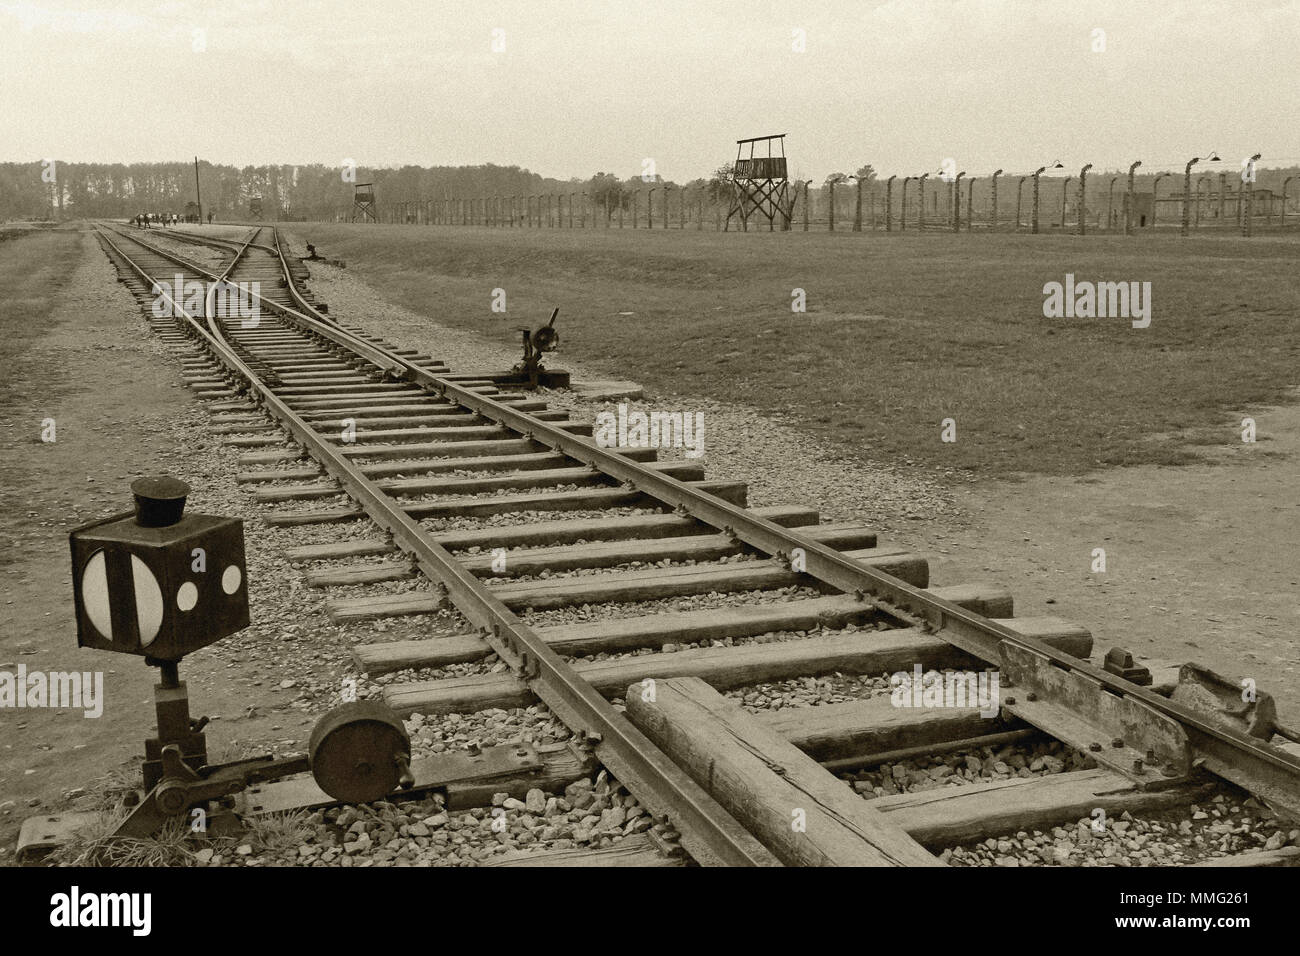 AUSCHWITZ, POLAND, OCTOBER 12, 2013: Rail of railroad at concentration camp at Auschwitz Birkenau KZ, black white and beige duplex processing photography with image noise effect, Poland Stock Photo